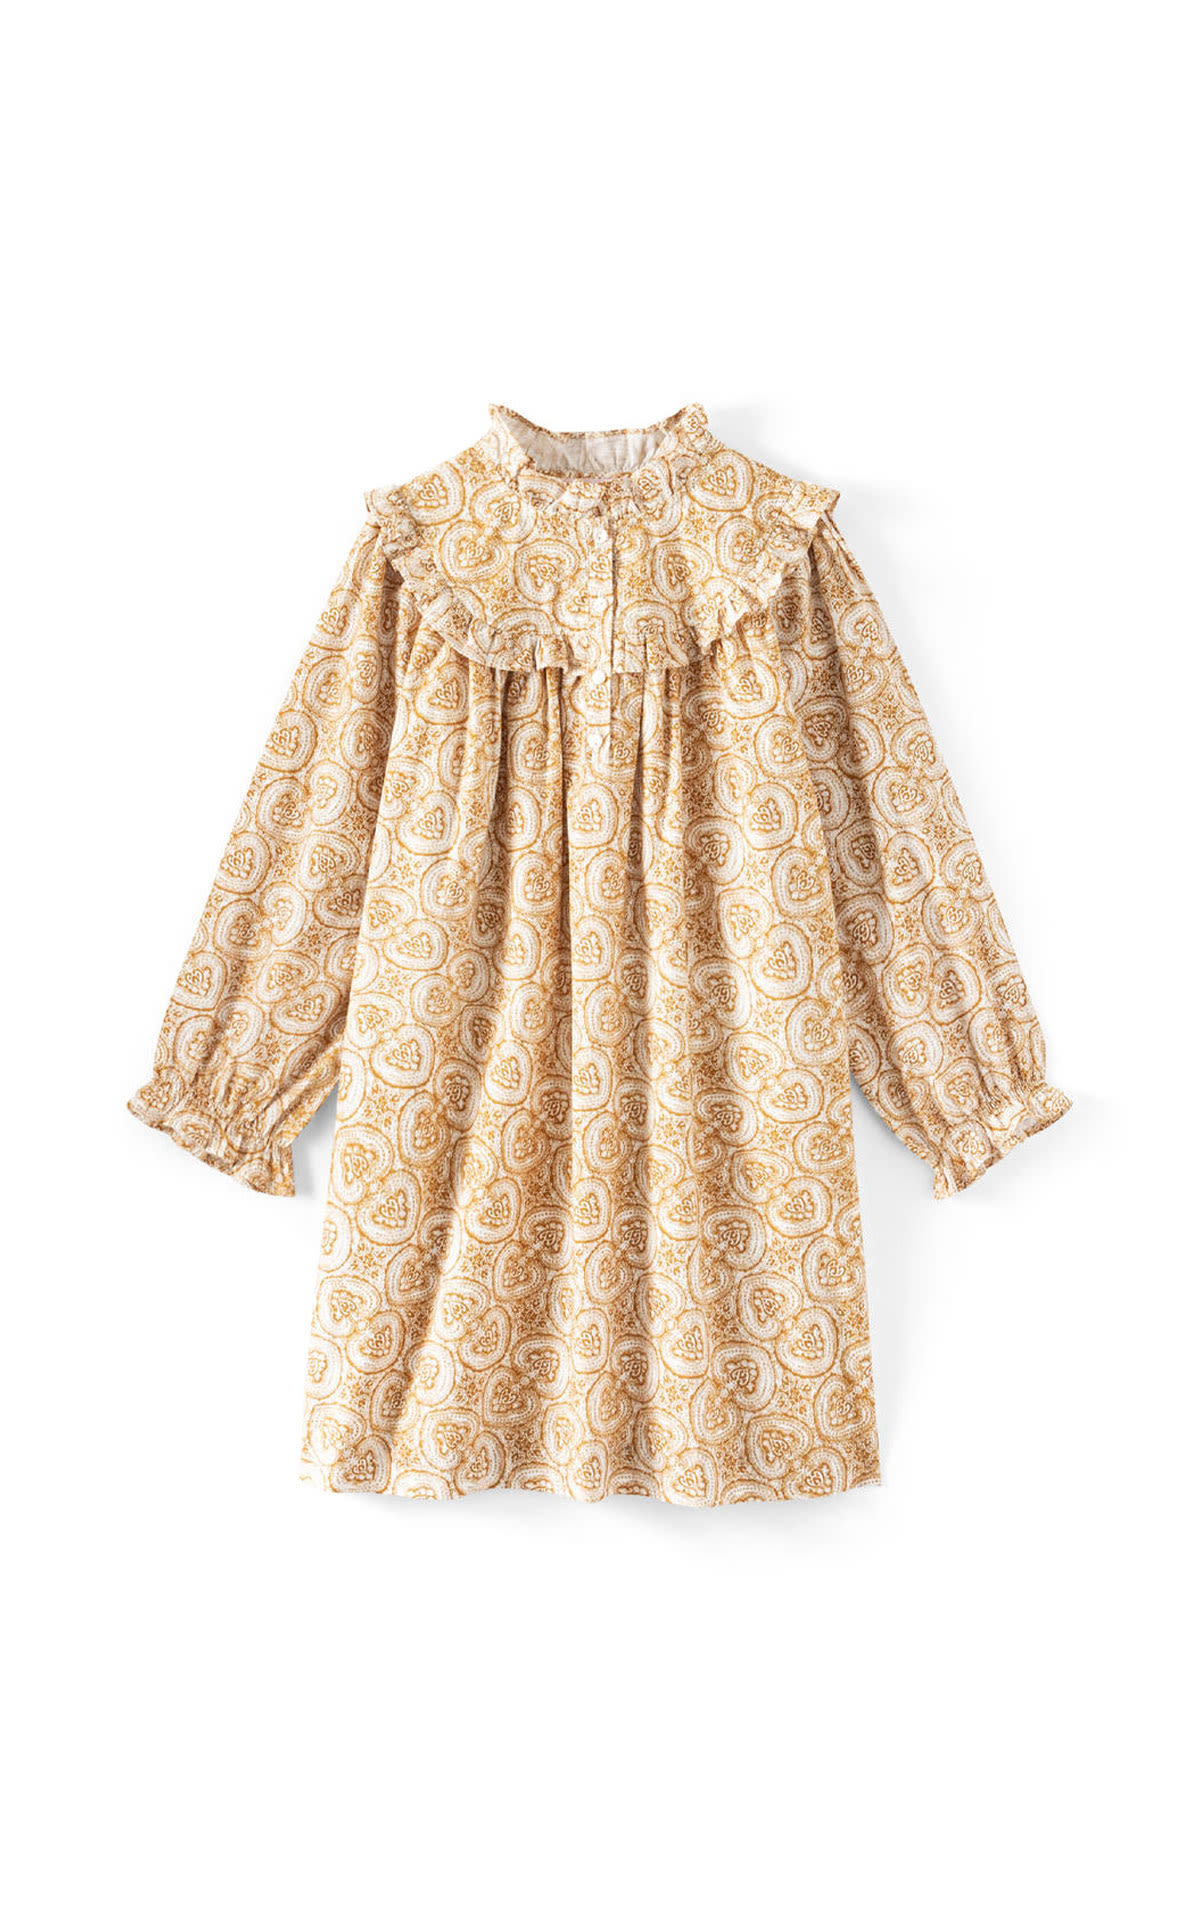 Bonpoint Girl's ruffle collar dress from Bicester Village